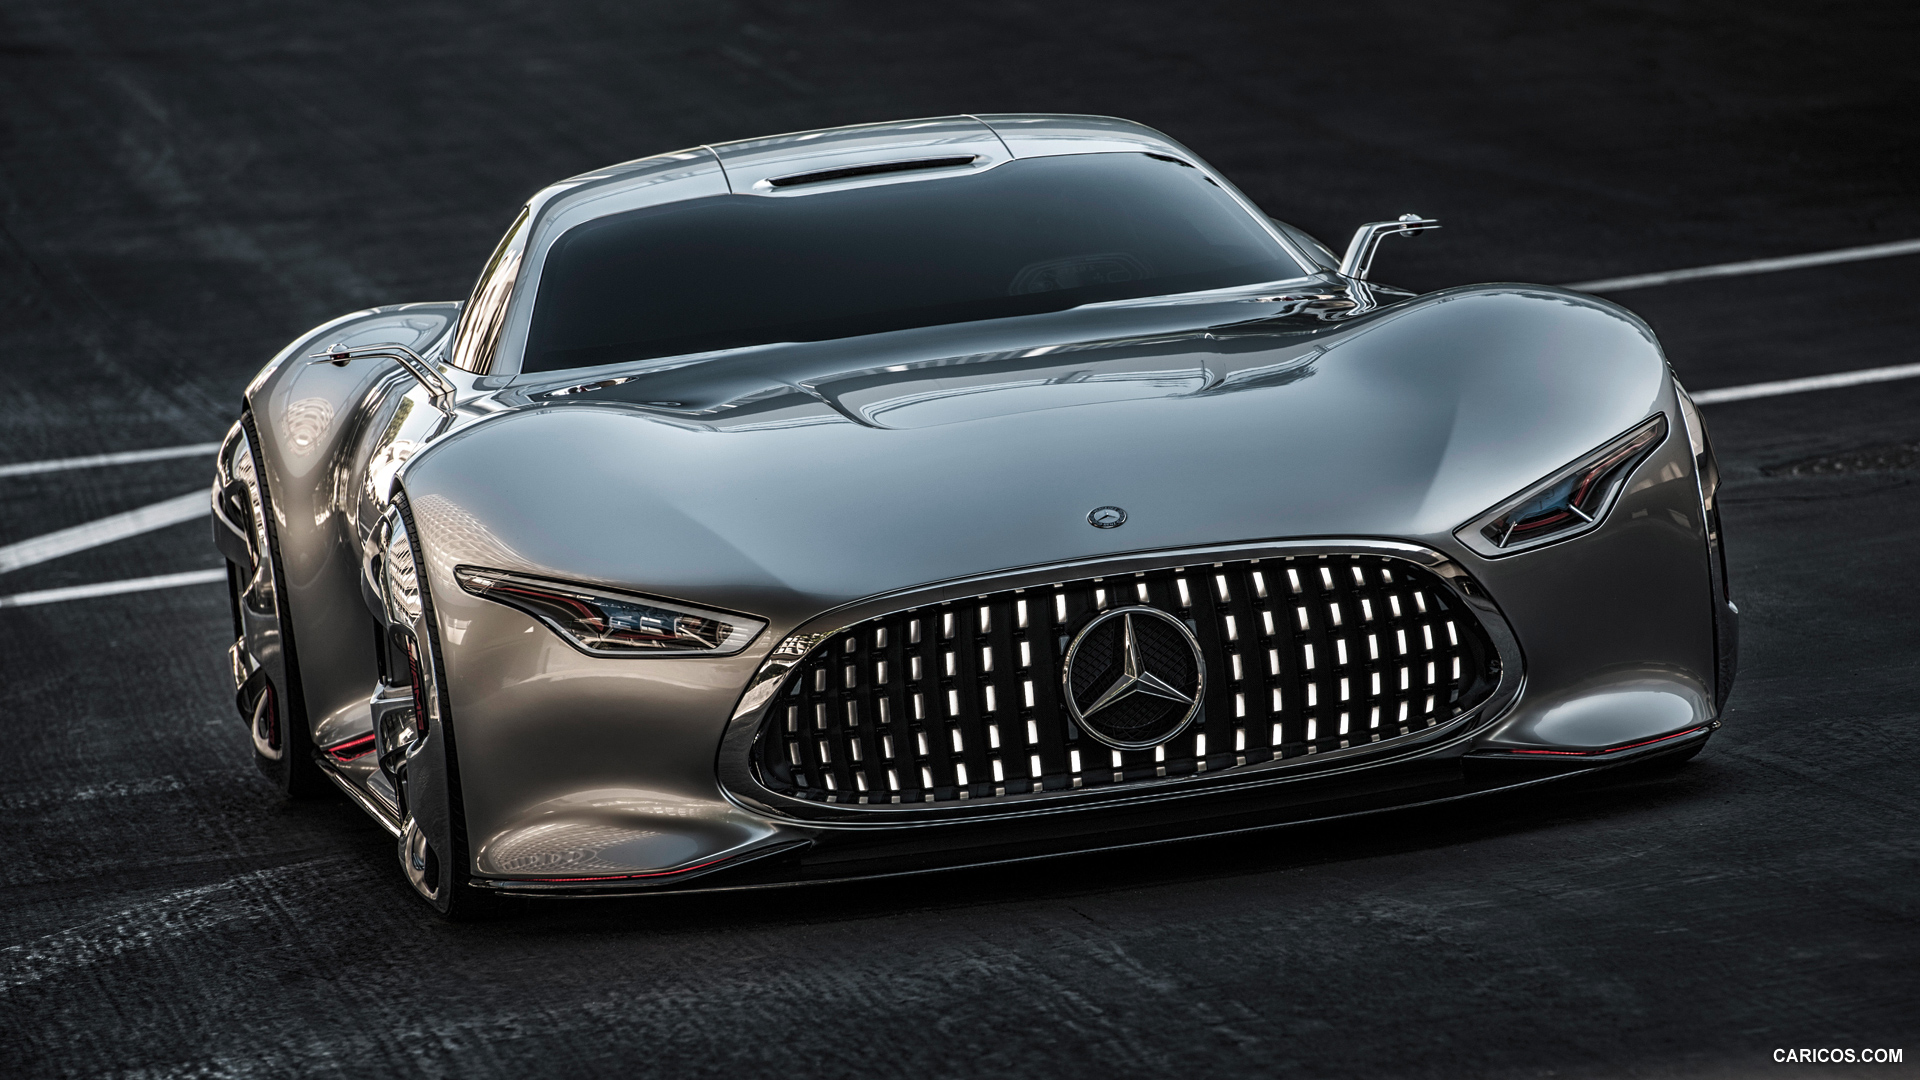 Mercedes-Benz AMG Vision Gran Turismo Concept (2013)  - Front, #14 of 25